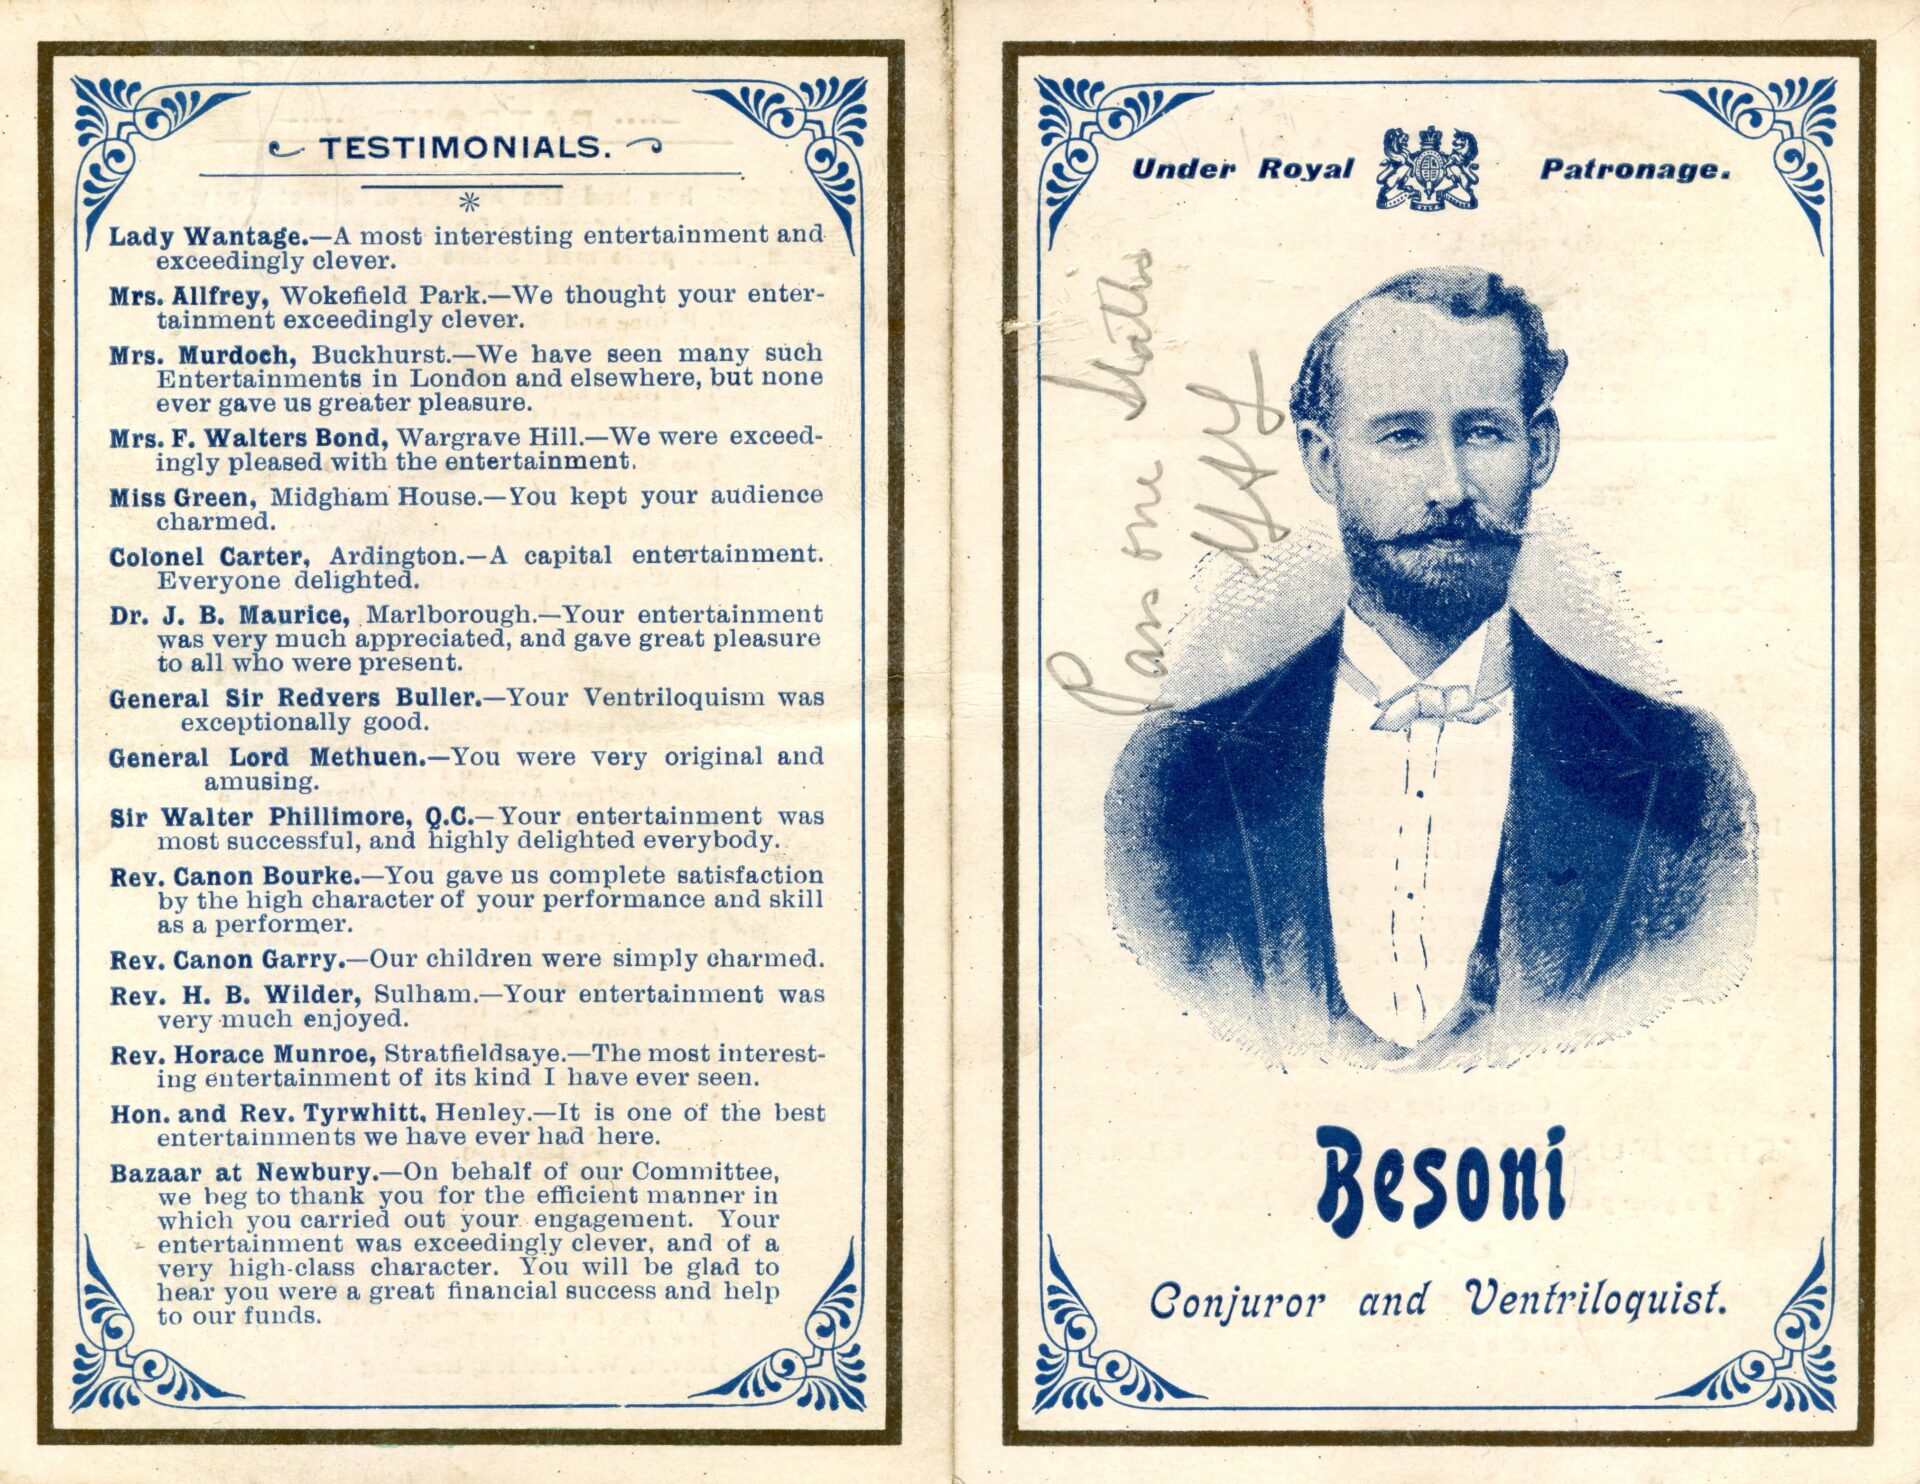 Brochure for Besoni – Conjuror and Ventriloquist